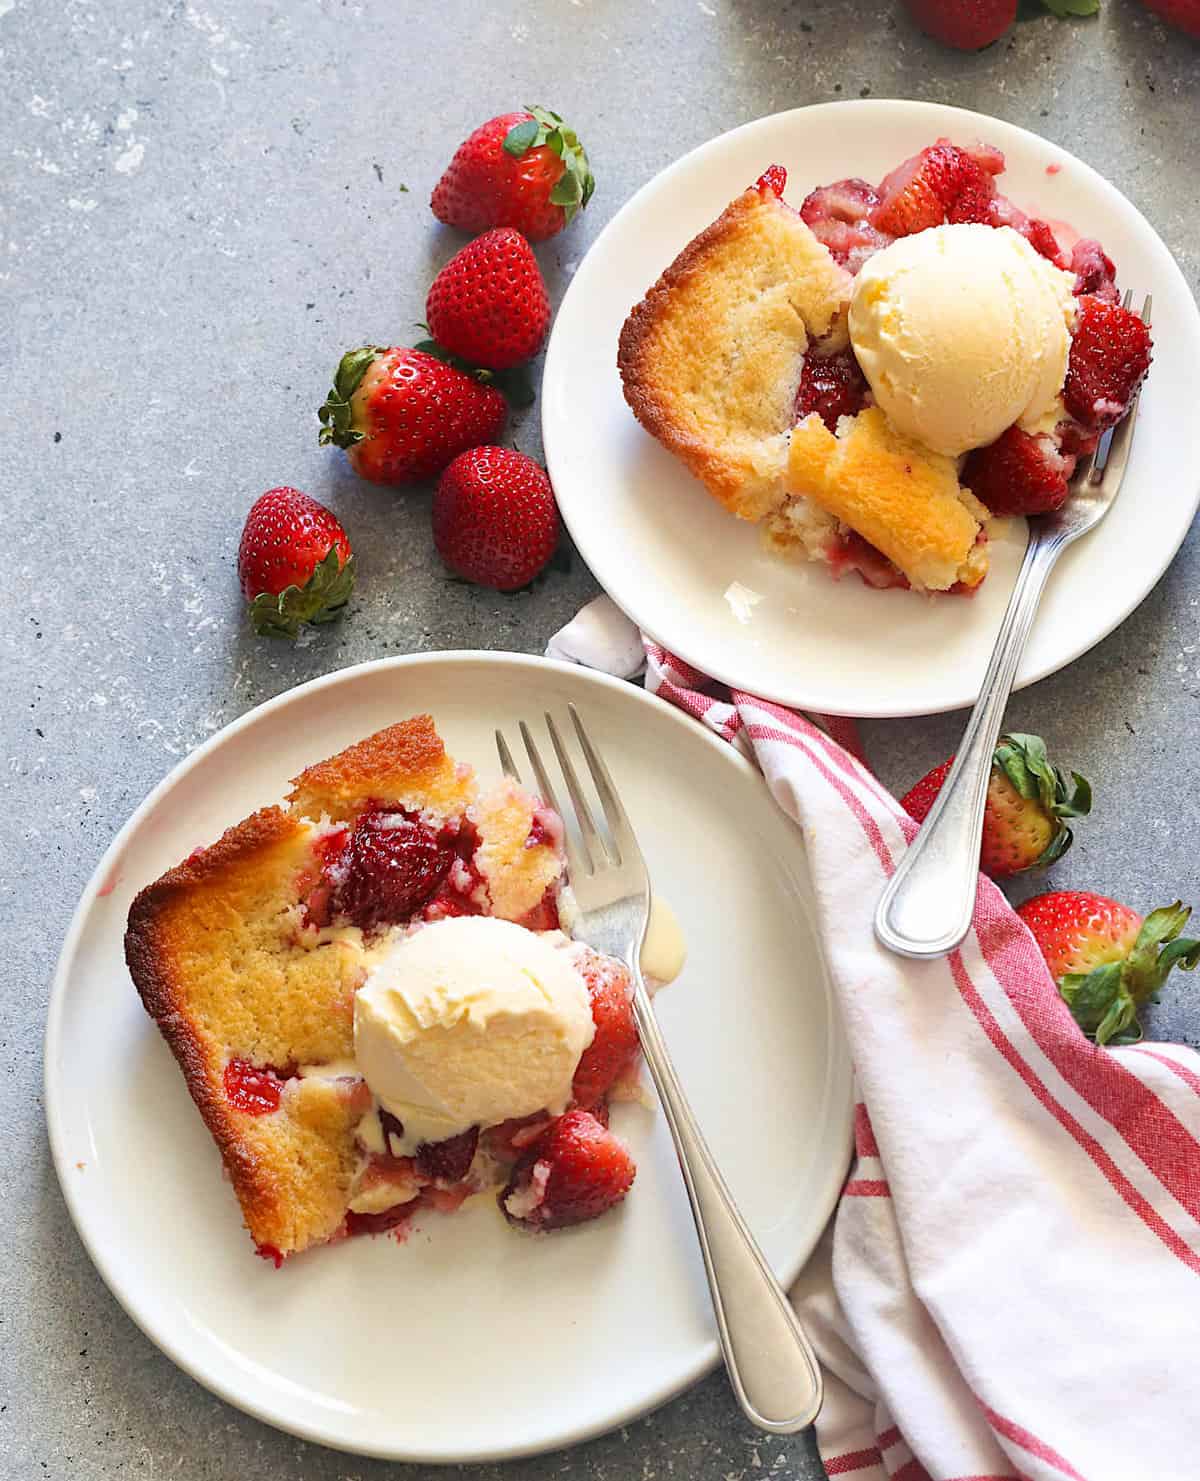 Serving up double the fun with two plates of strawberry cobbler topped with vanilla ice cream